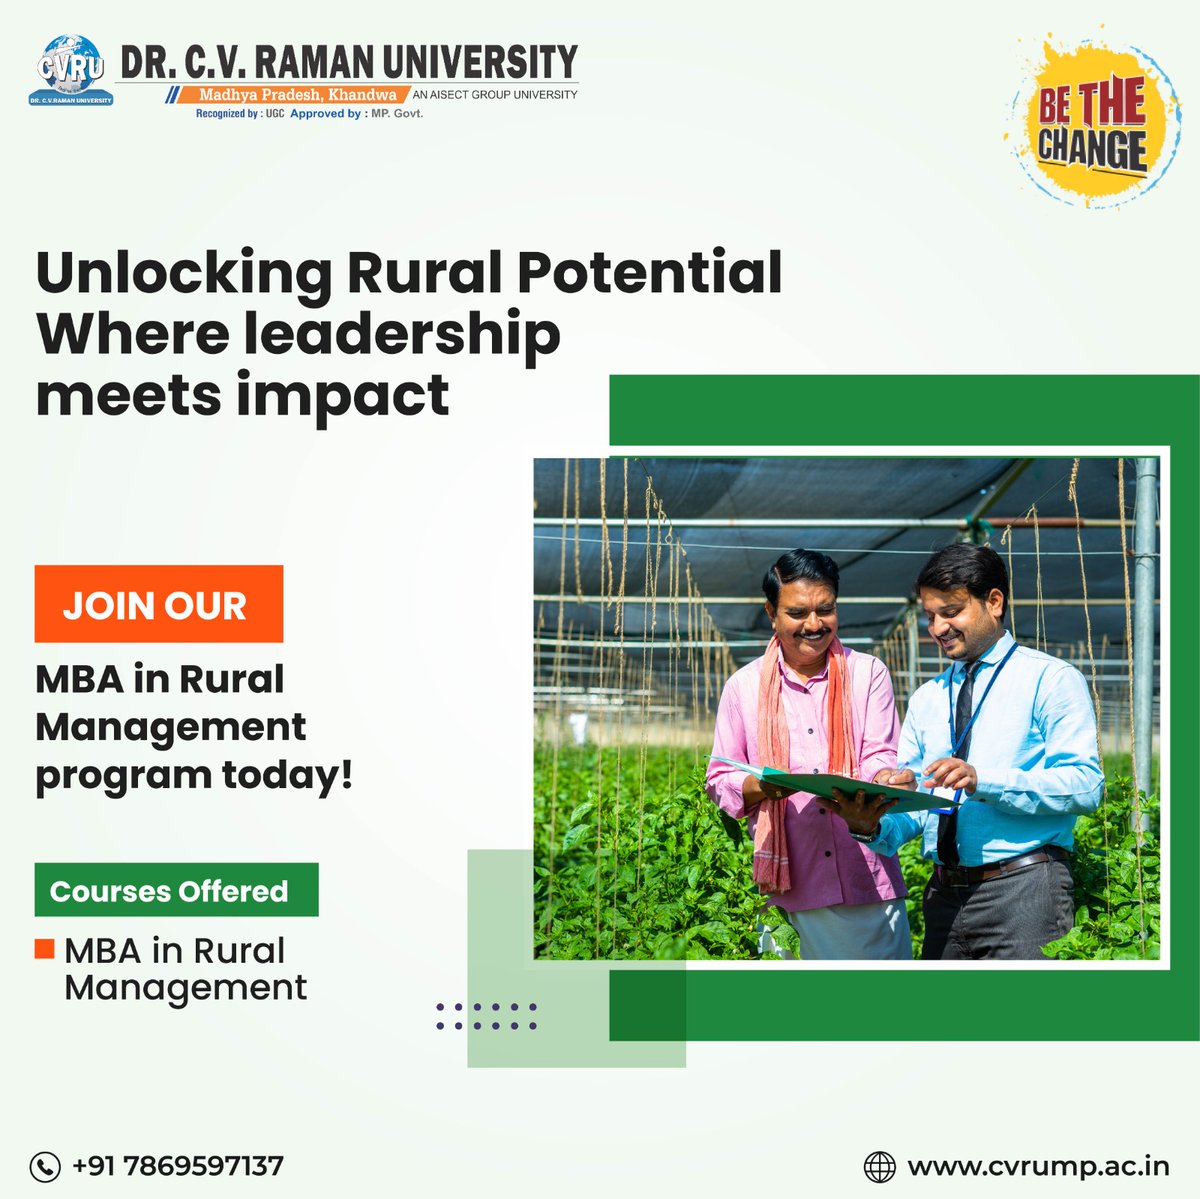 Empowering rural leaders: Where leadership meets impact. Enroll in our MBA in Rural Management program today and unlock your potential to make a difference in rural communities. 
#CVRUKhandwa #BeTheChange #MBA #RuralManagement #Career #Growth #Opportunity #Learning #Success